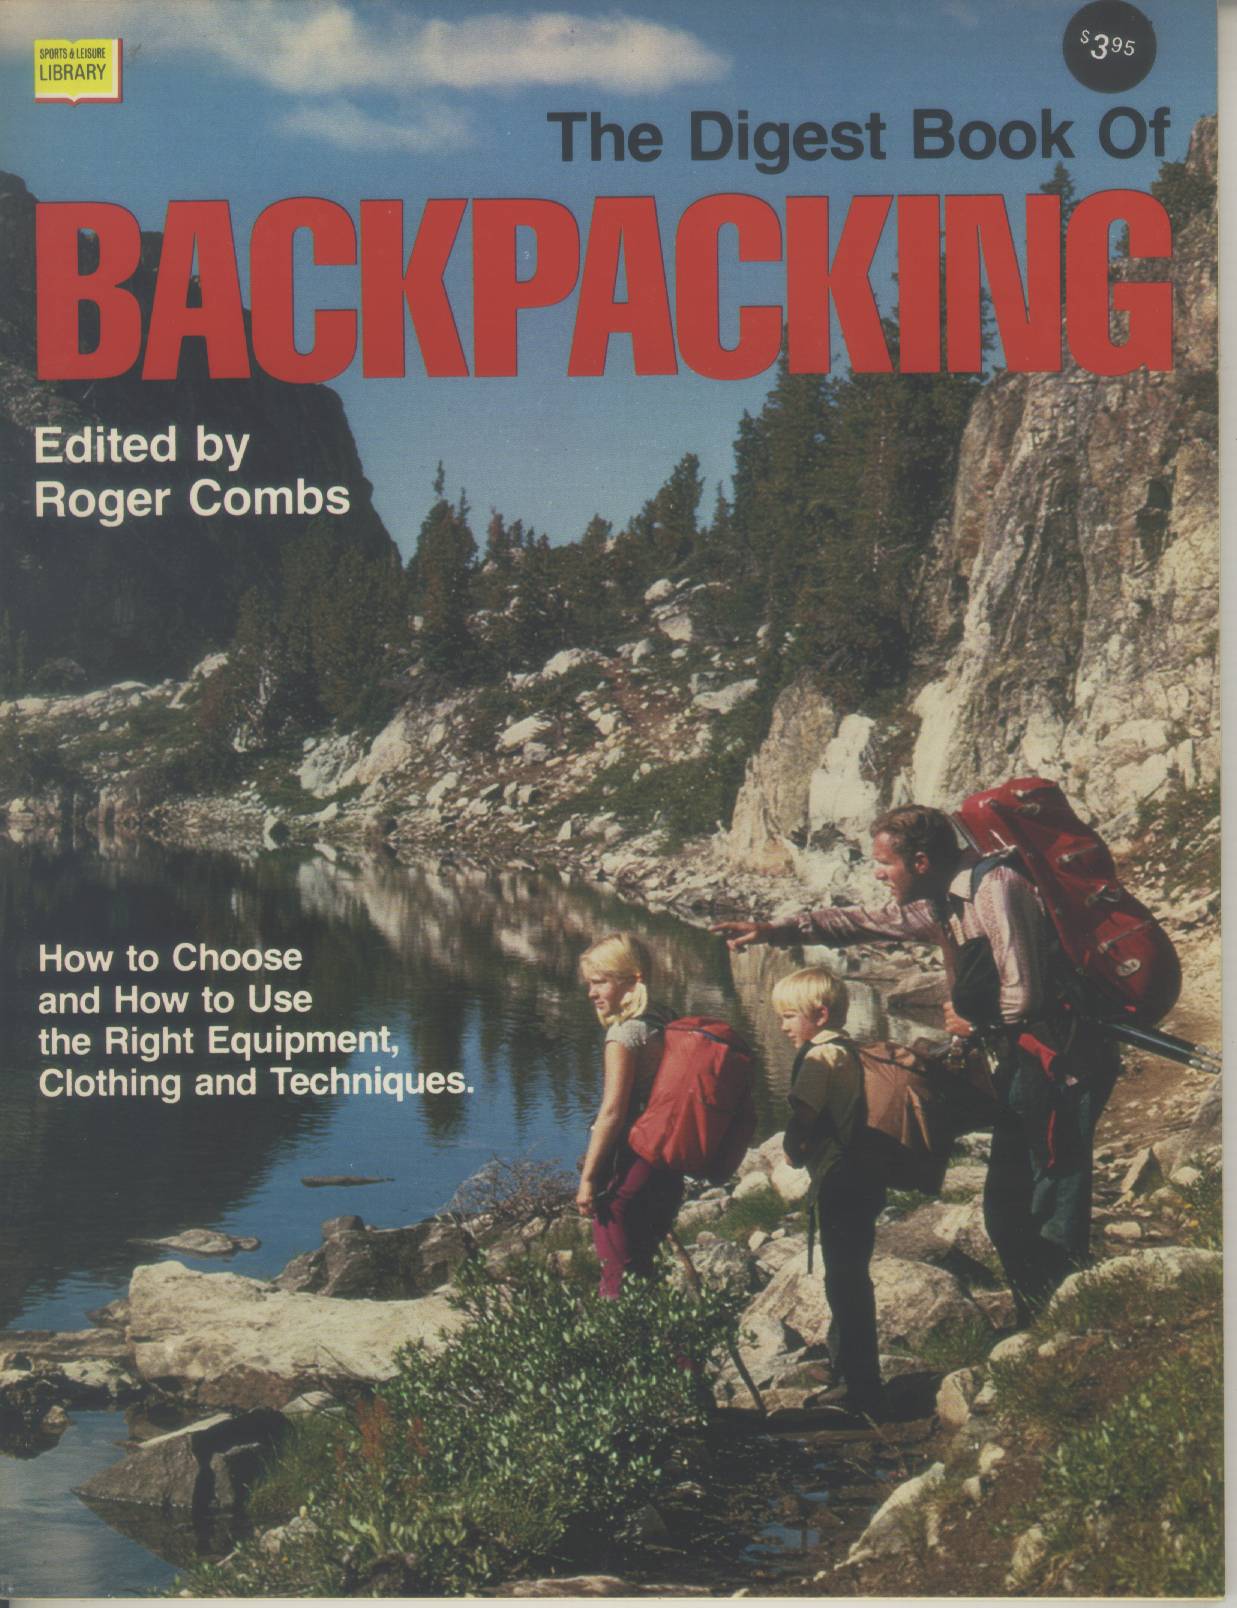 BACKPACKING (THE DIGEST BOOK OF).